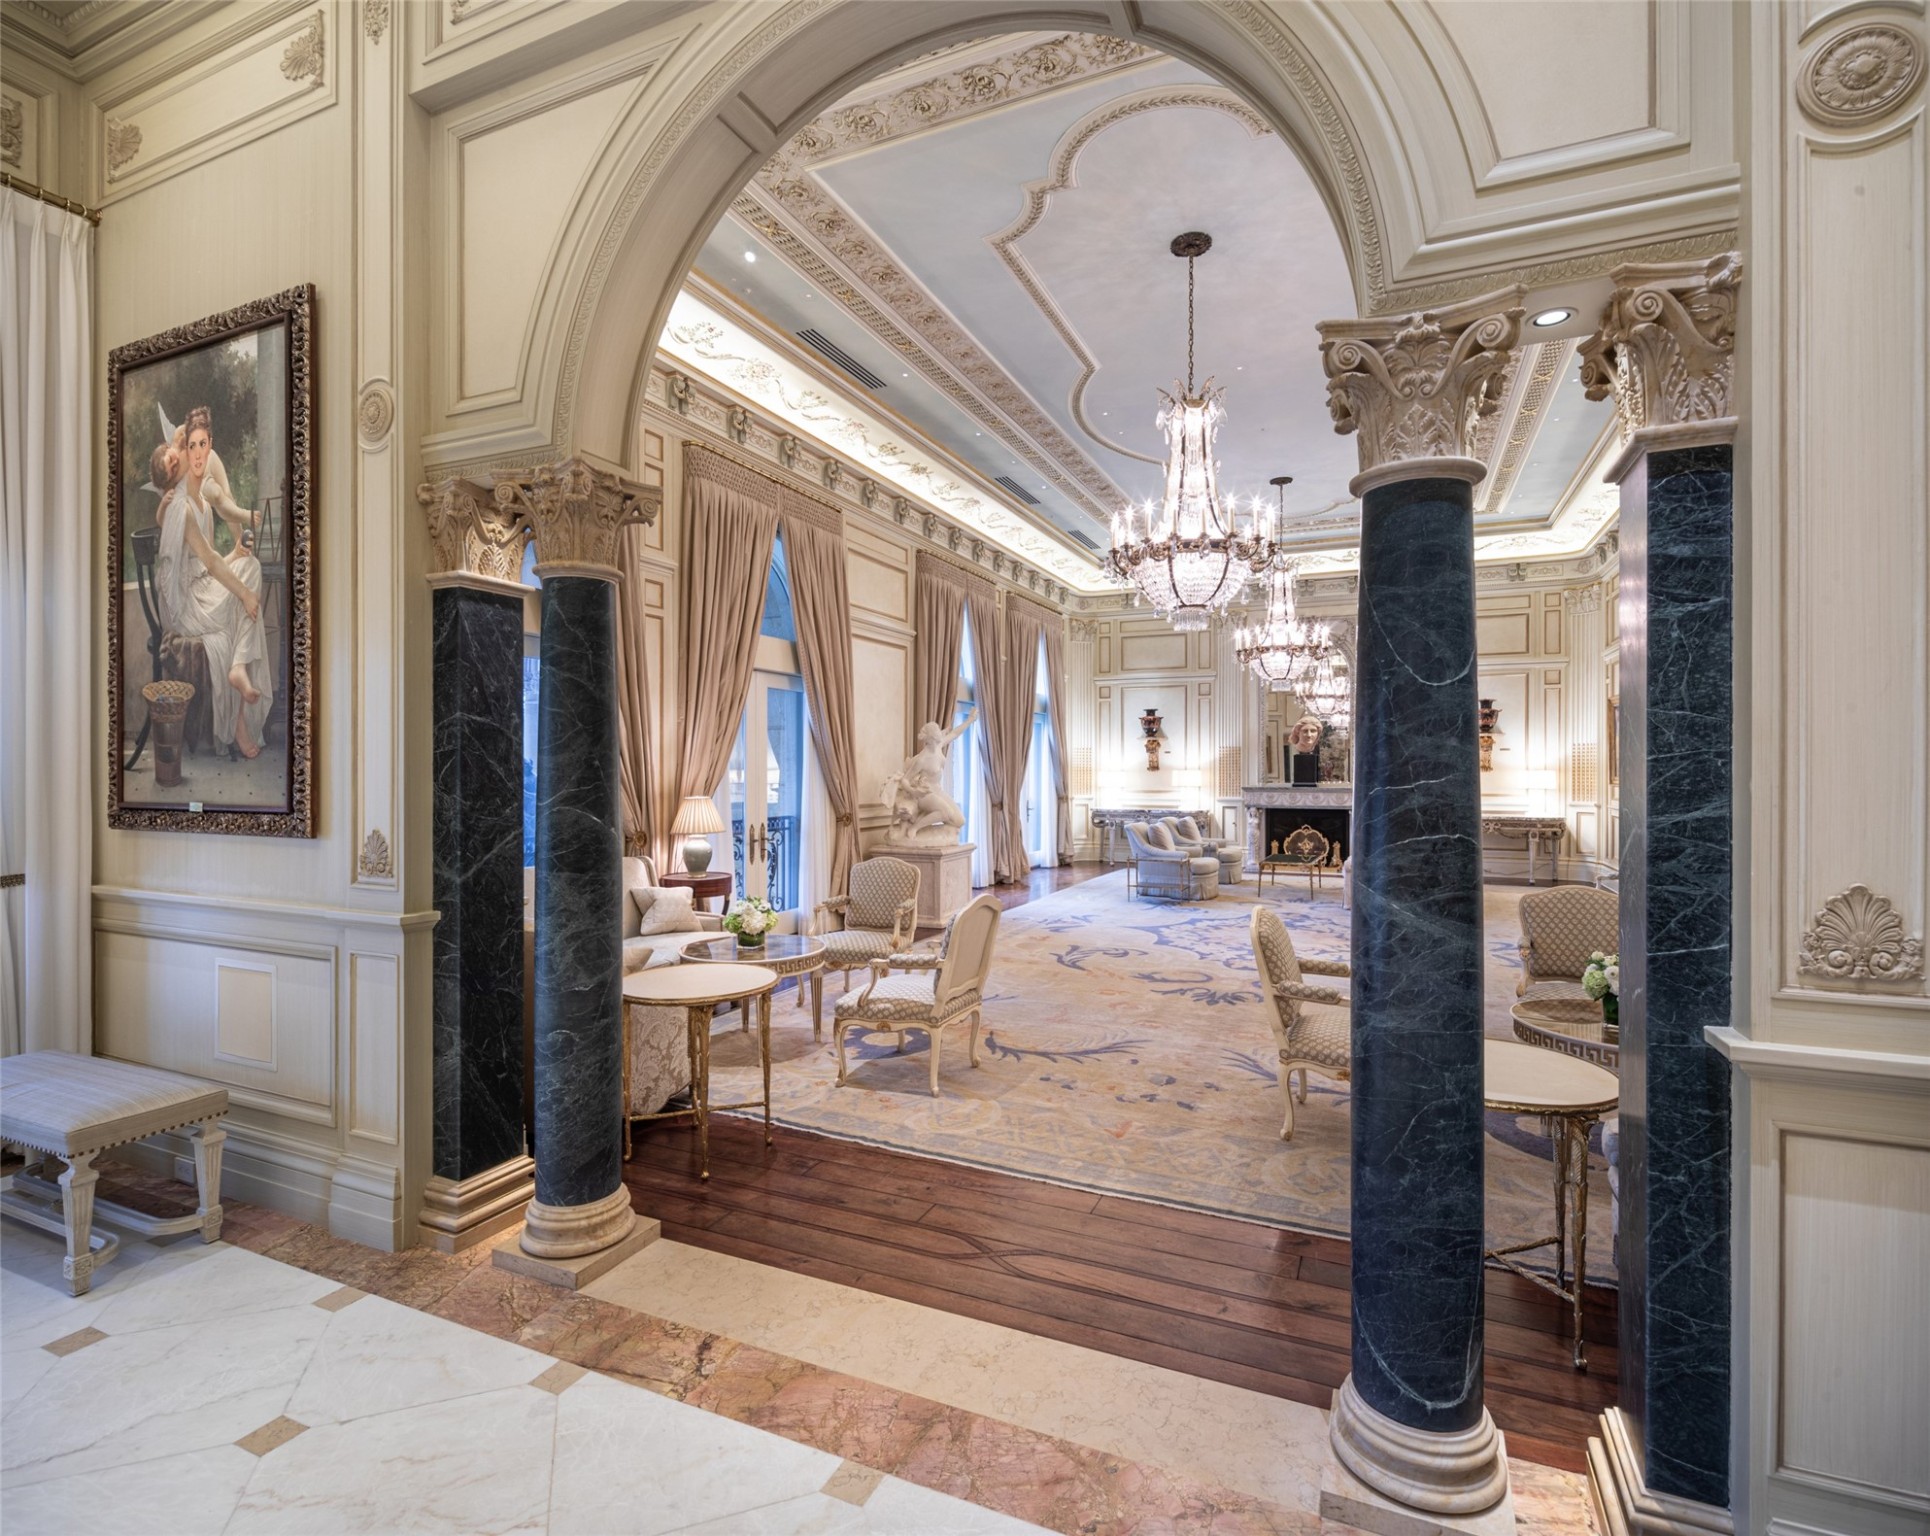 Marble columns with Corinthian columns flank the entryway to the Versailles room, an otherworldly retreat crafted with the utmost attention to historical detail and master craftsmanship, inspired by the grand salons of the renowned French palace.